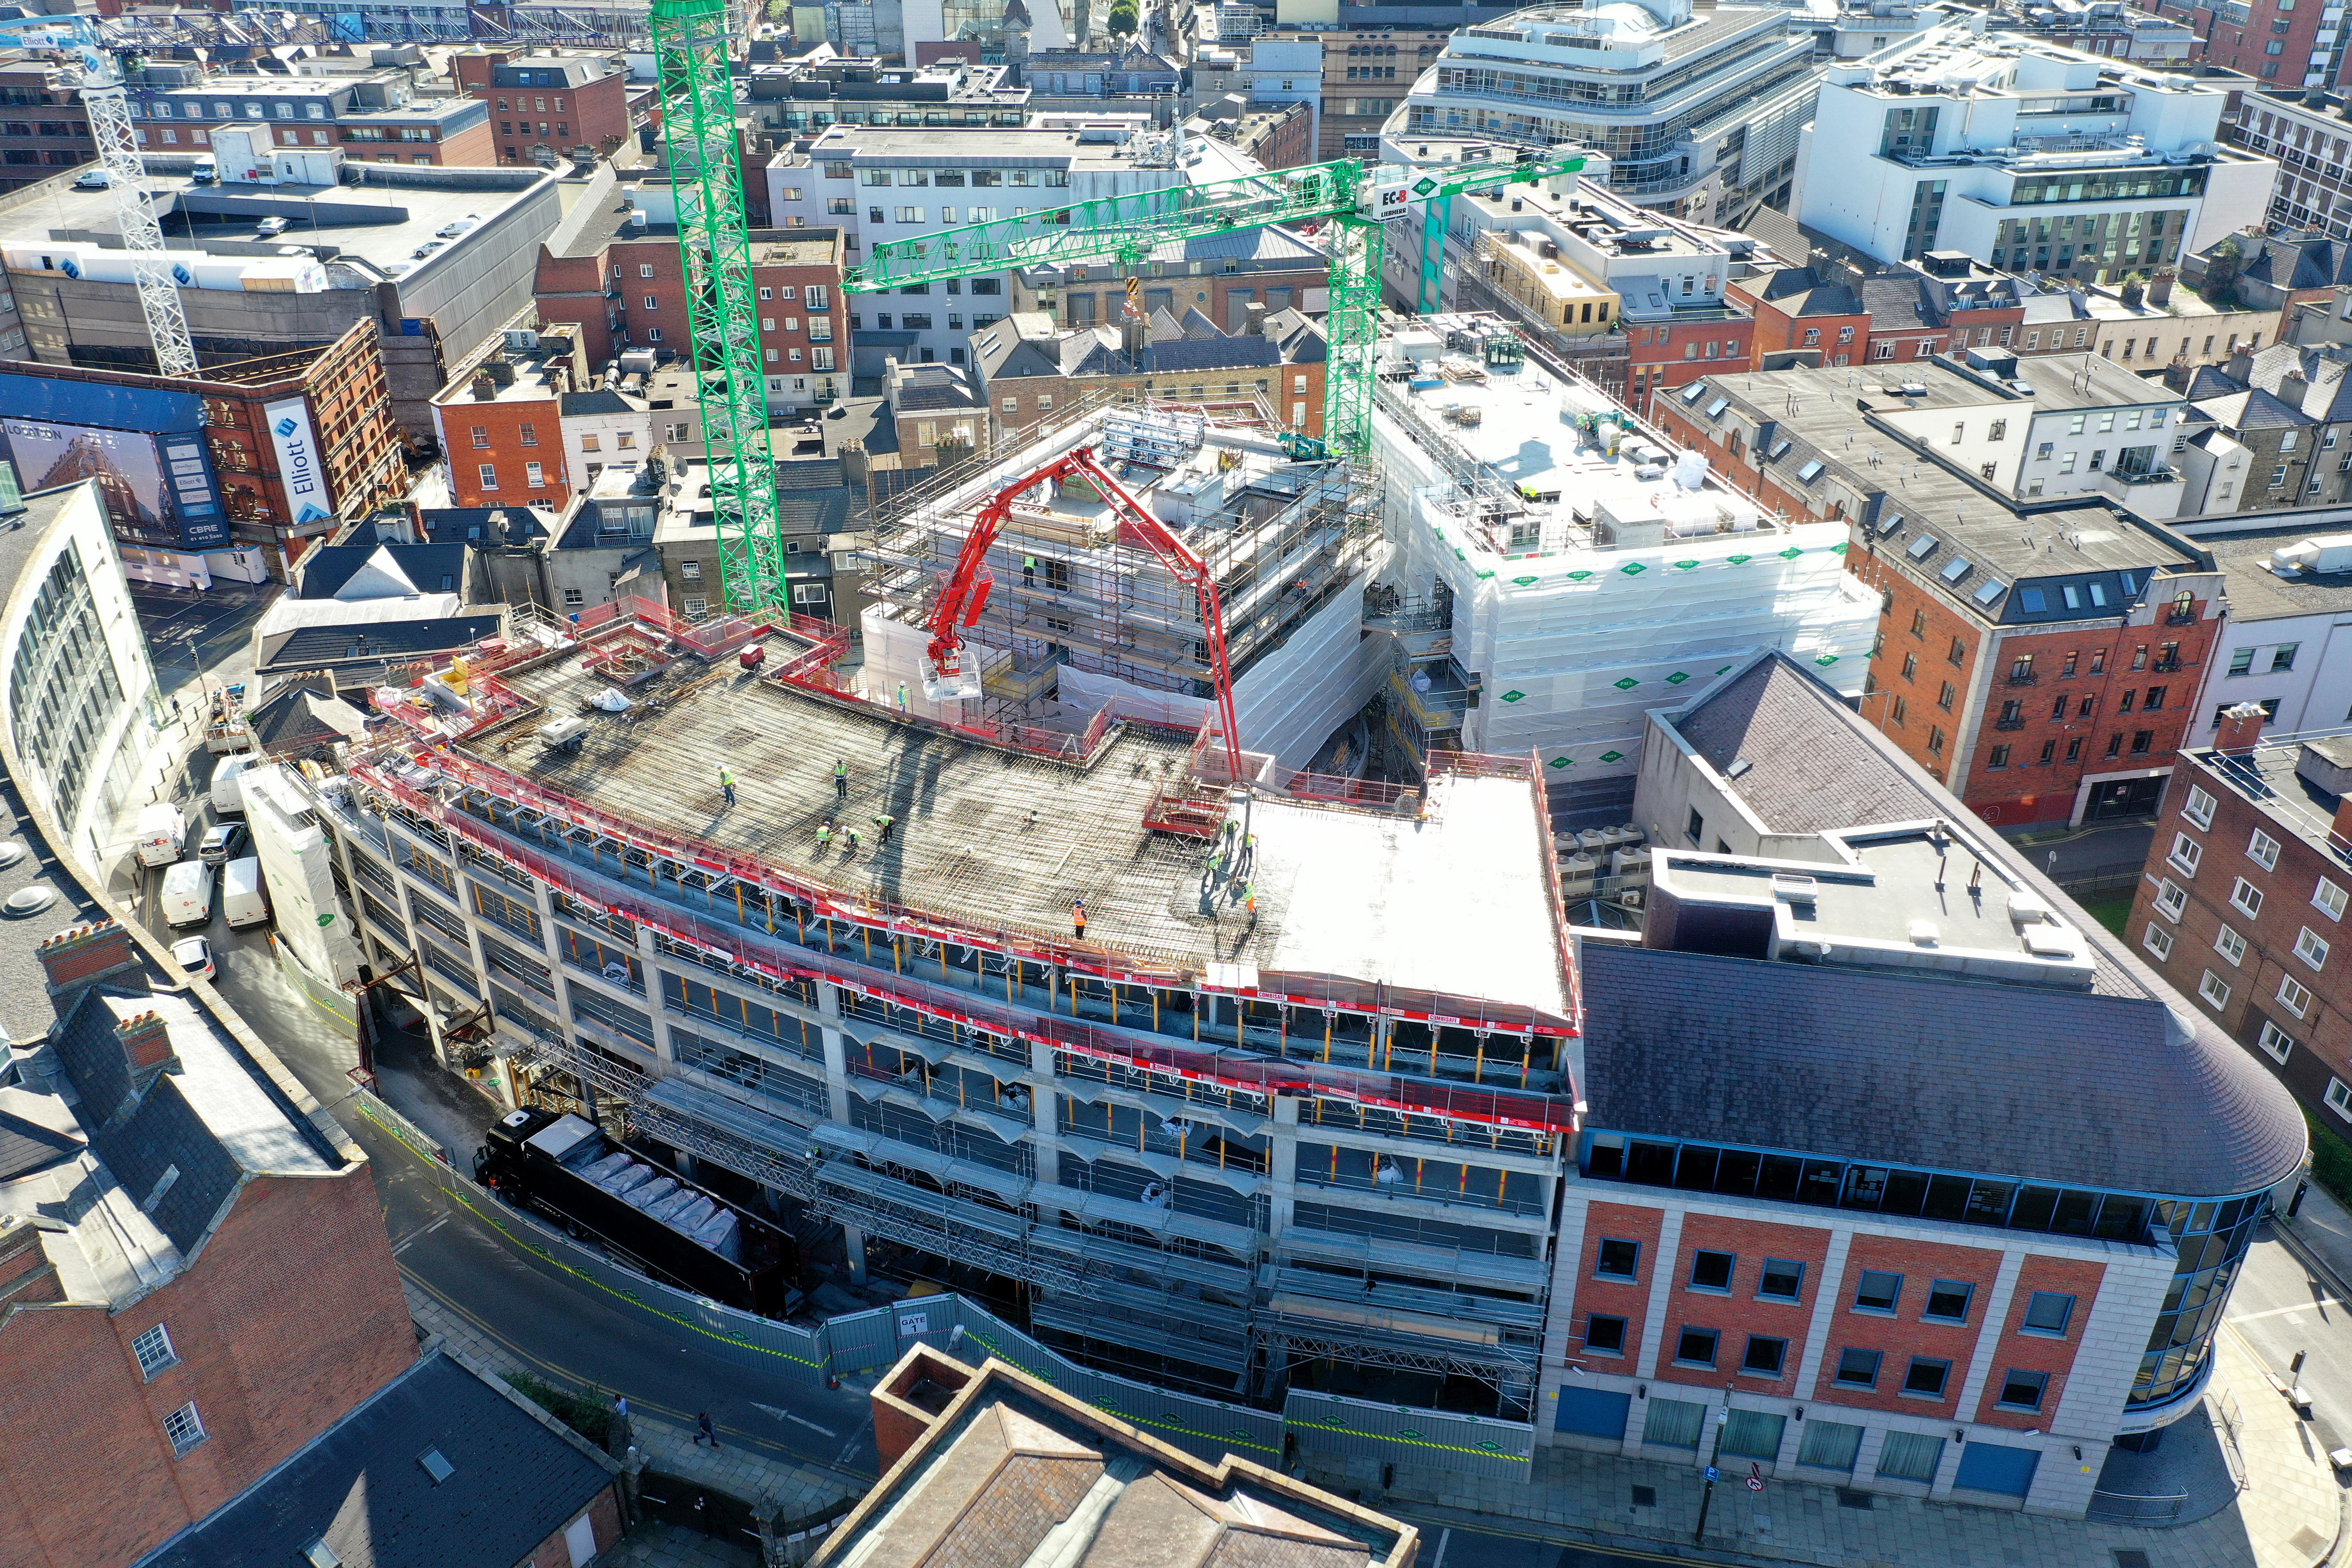 Aungier Street Student Accommodation Nears Completion